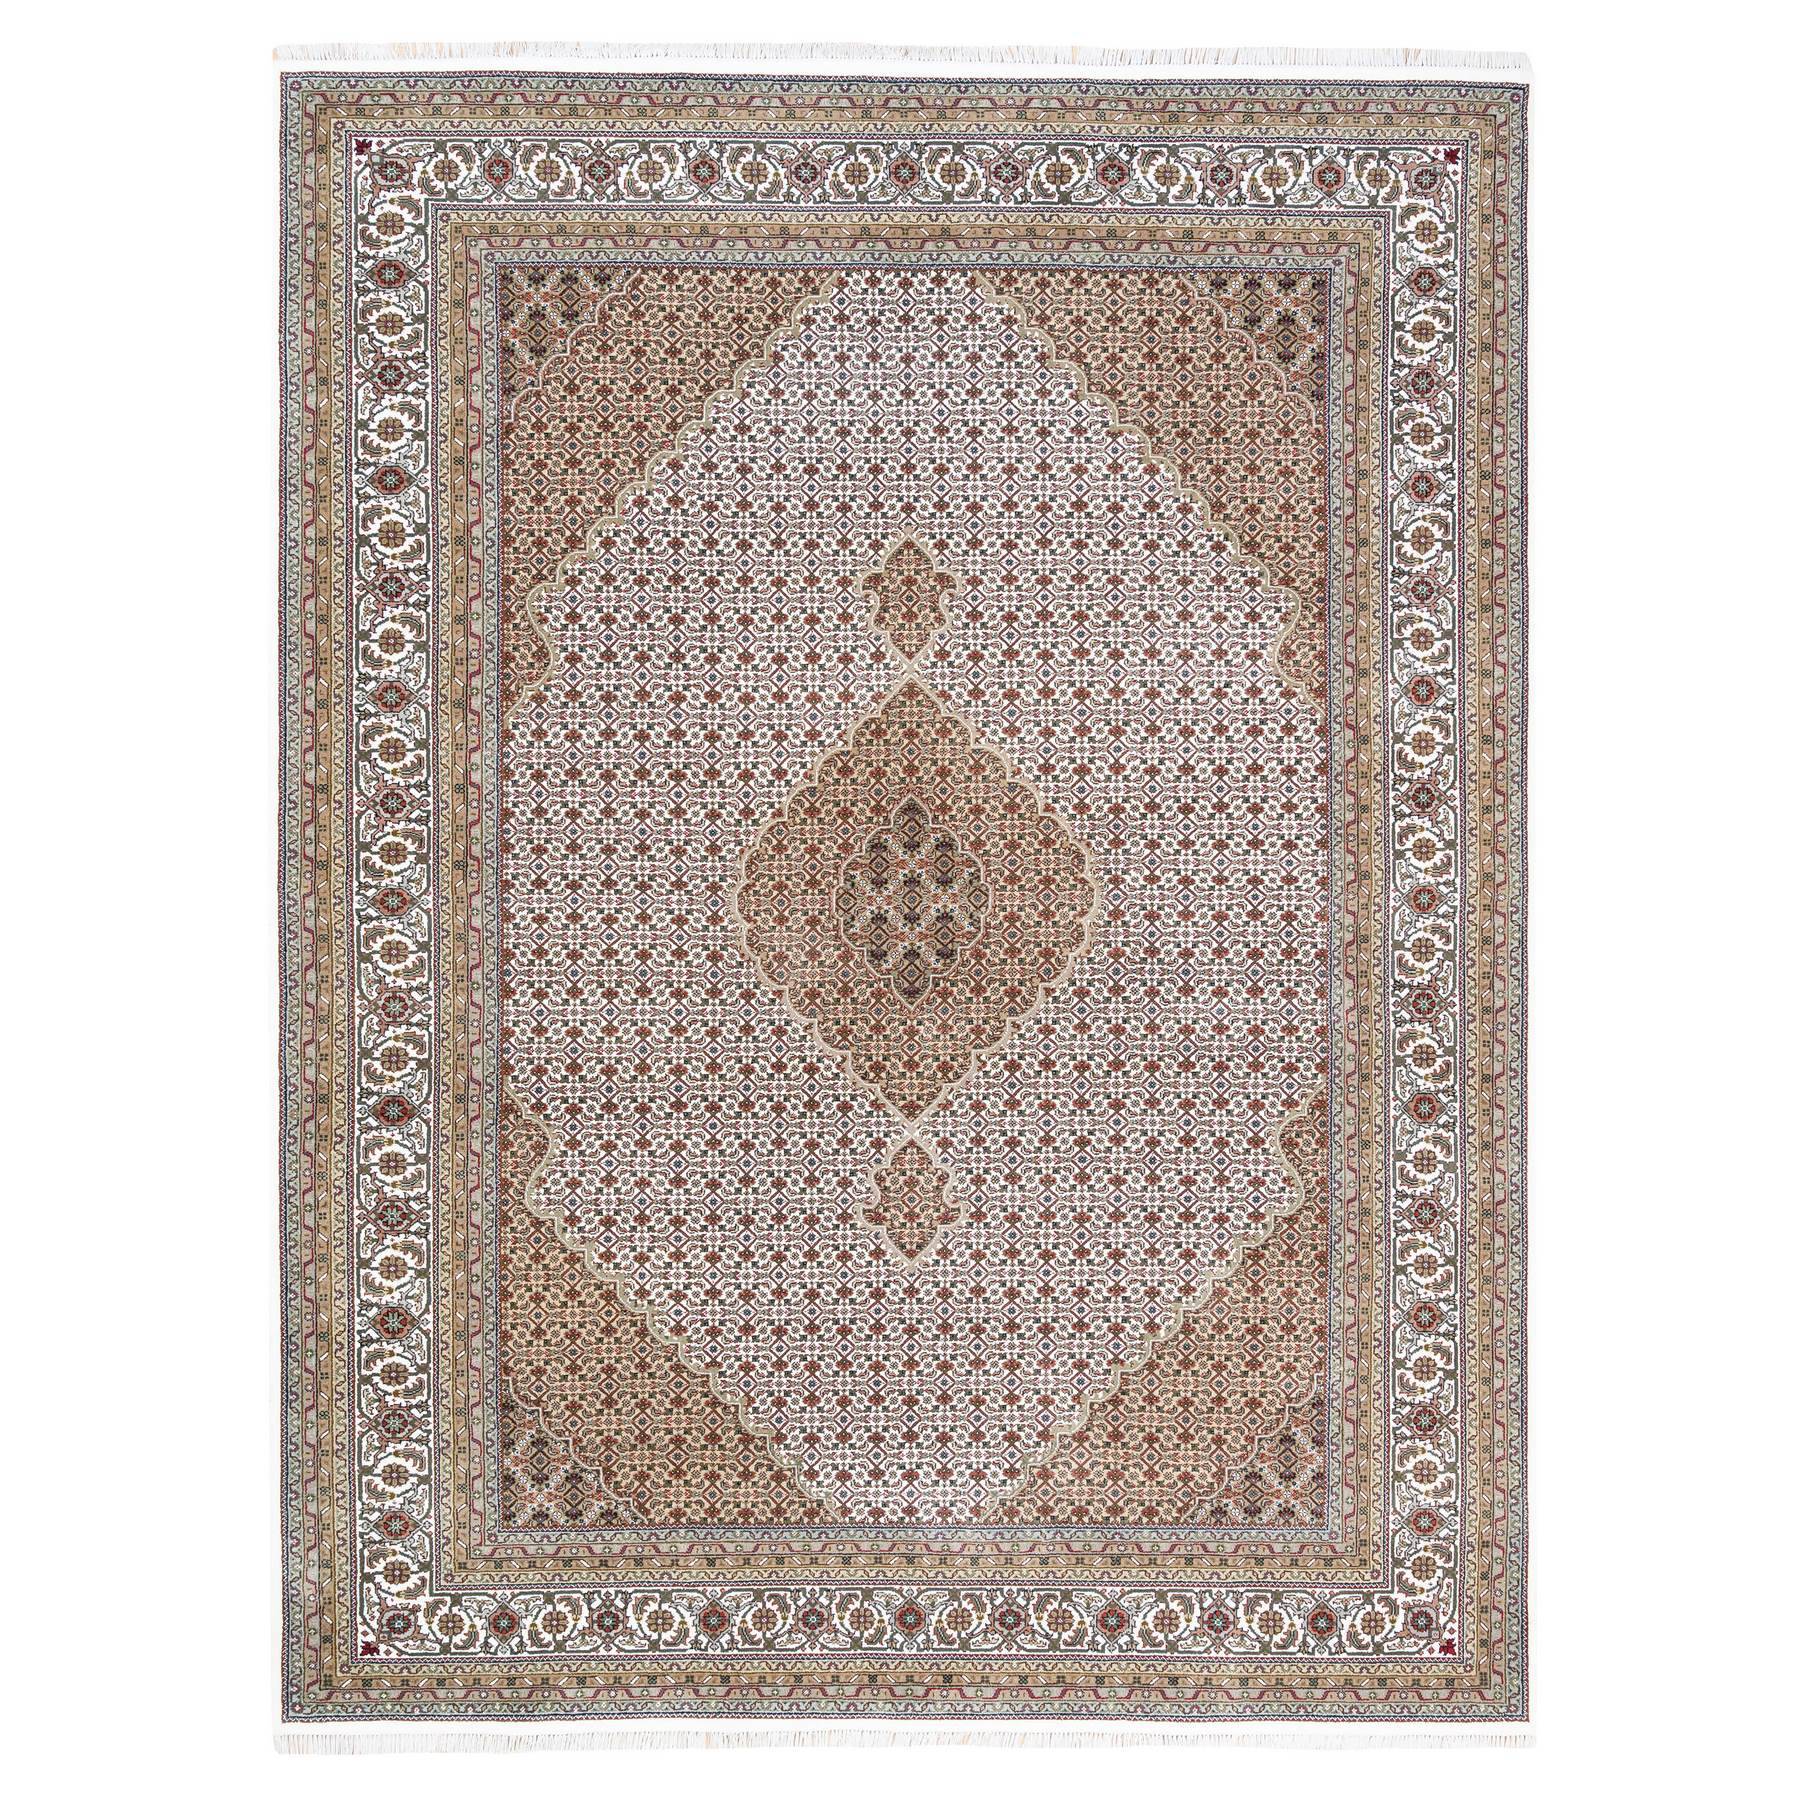 Pirniakan Collection Hand Knotted Ivory Rug No: 1125262